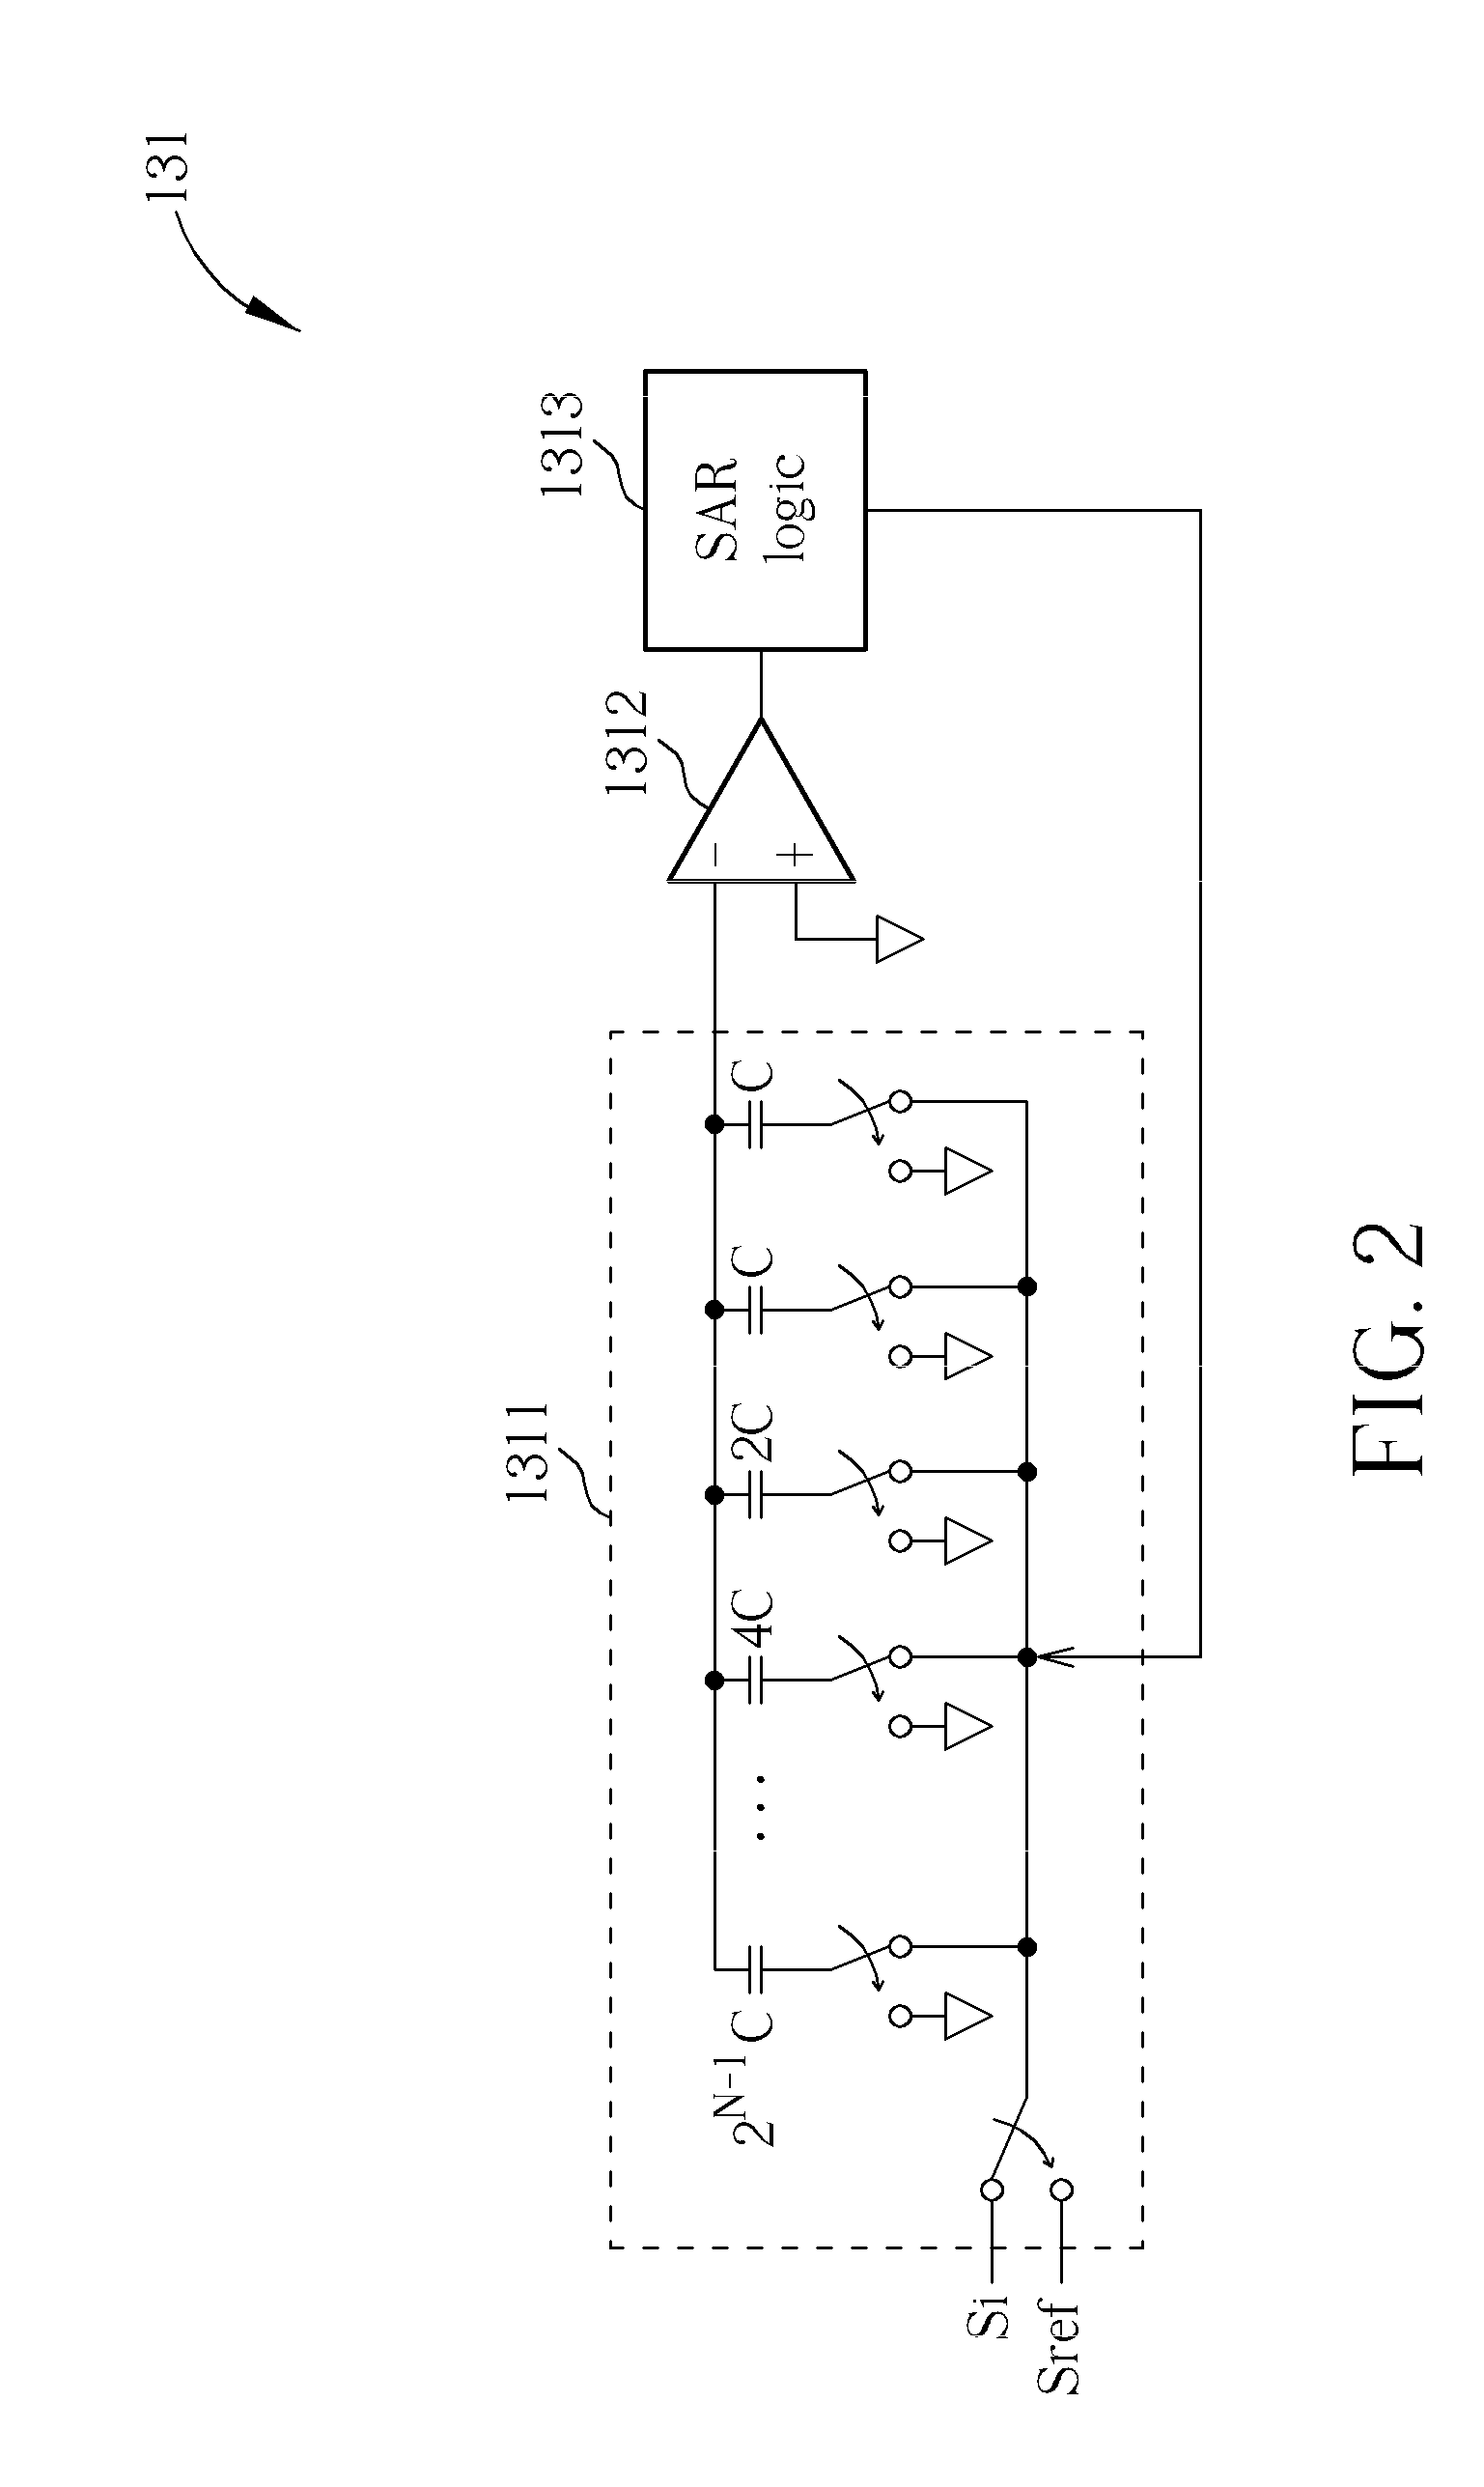 Sigma-delta modulator with SAR ADC and truncater having order lower than order of integrator and related sigma-delta modulation method